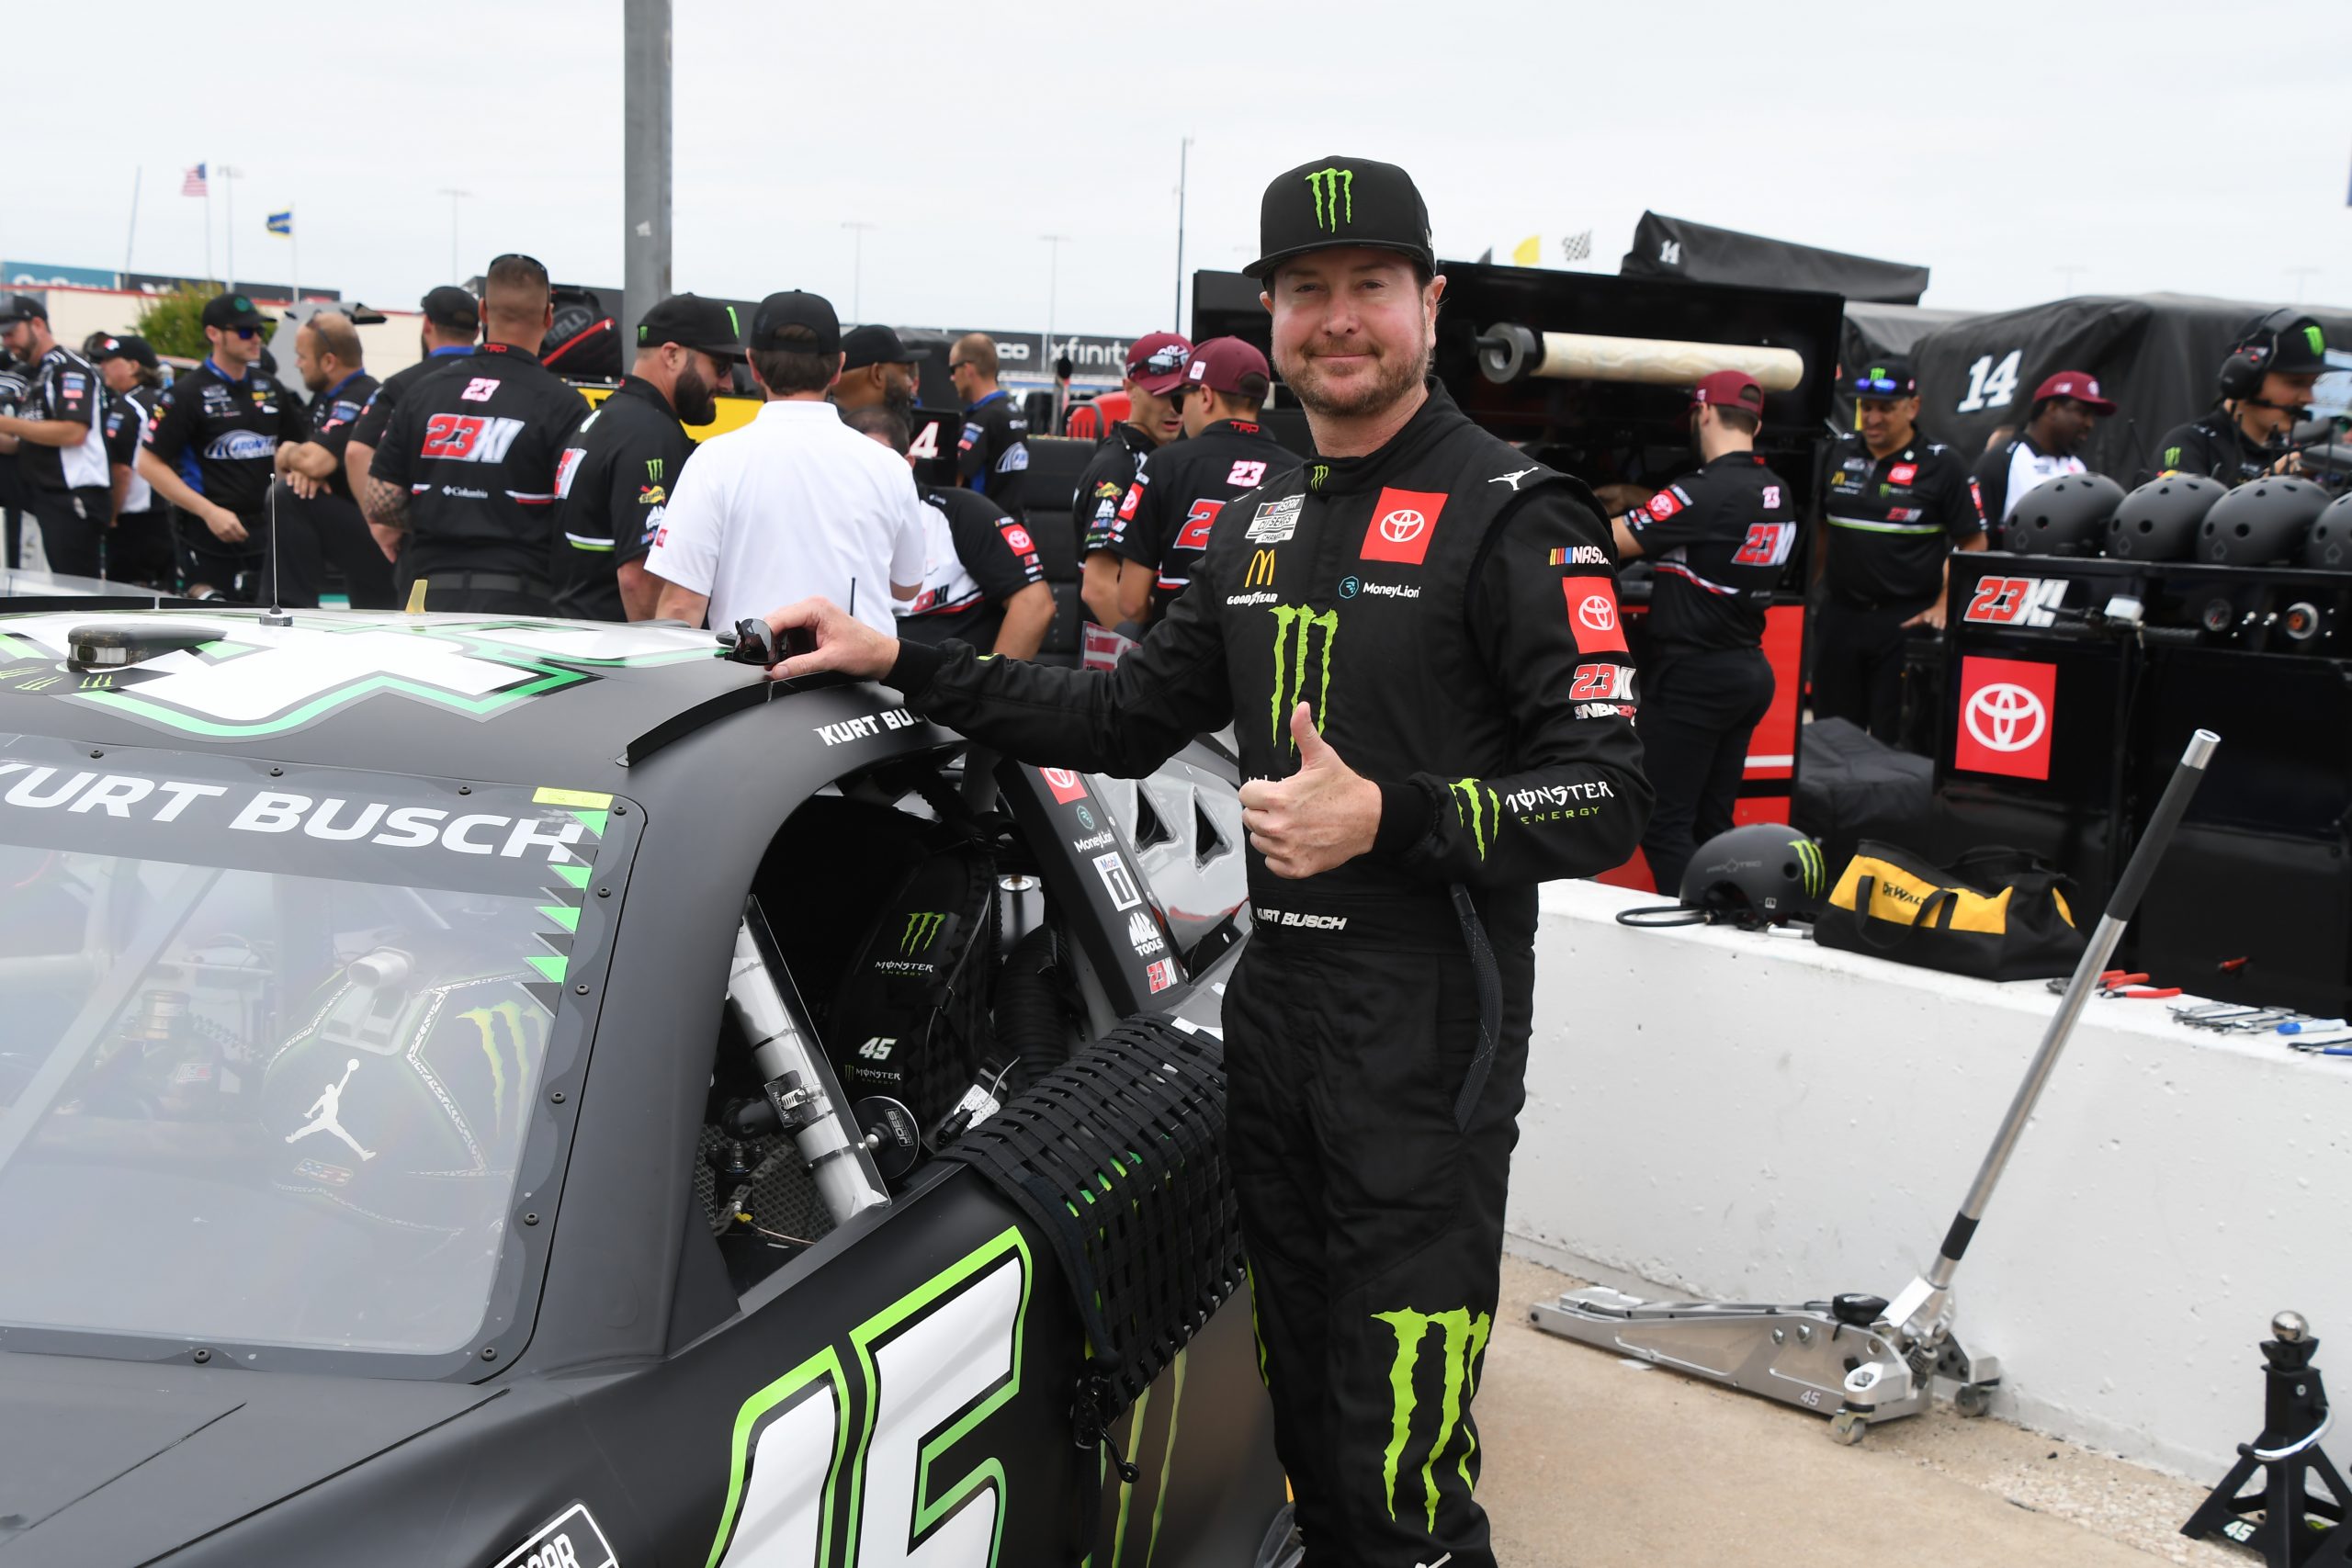 Kurt Busch is revved up for Sunday's Ambetter 301 at New Hampshire. (Photo: Sean Folsom | The Podium Finish)